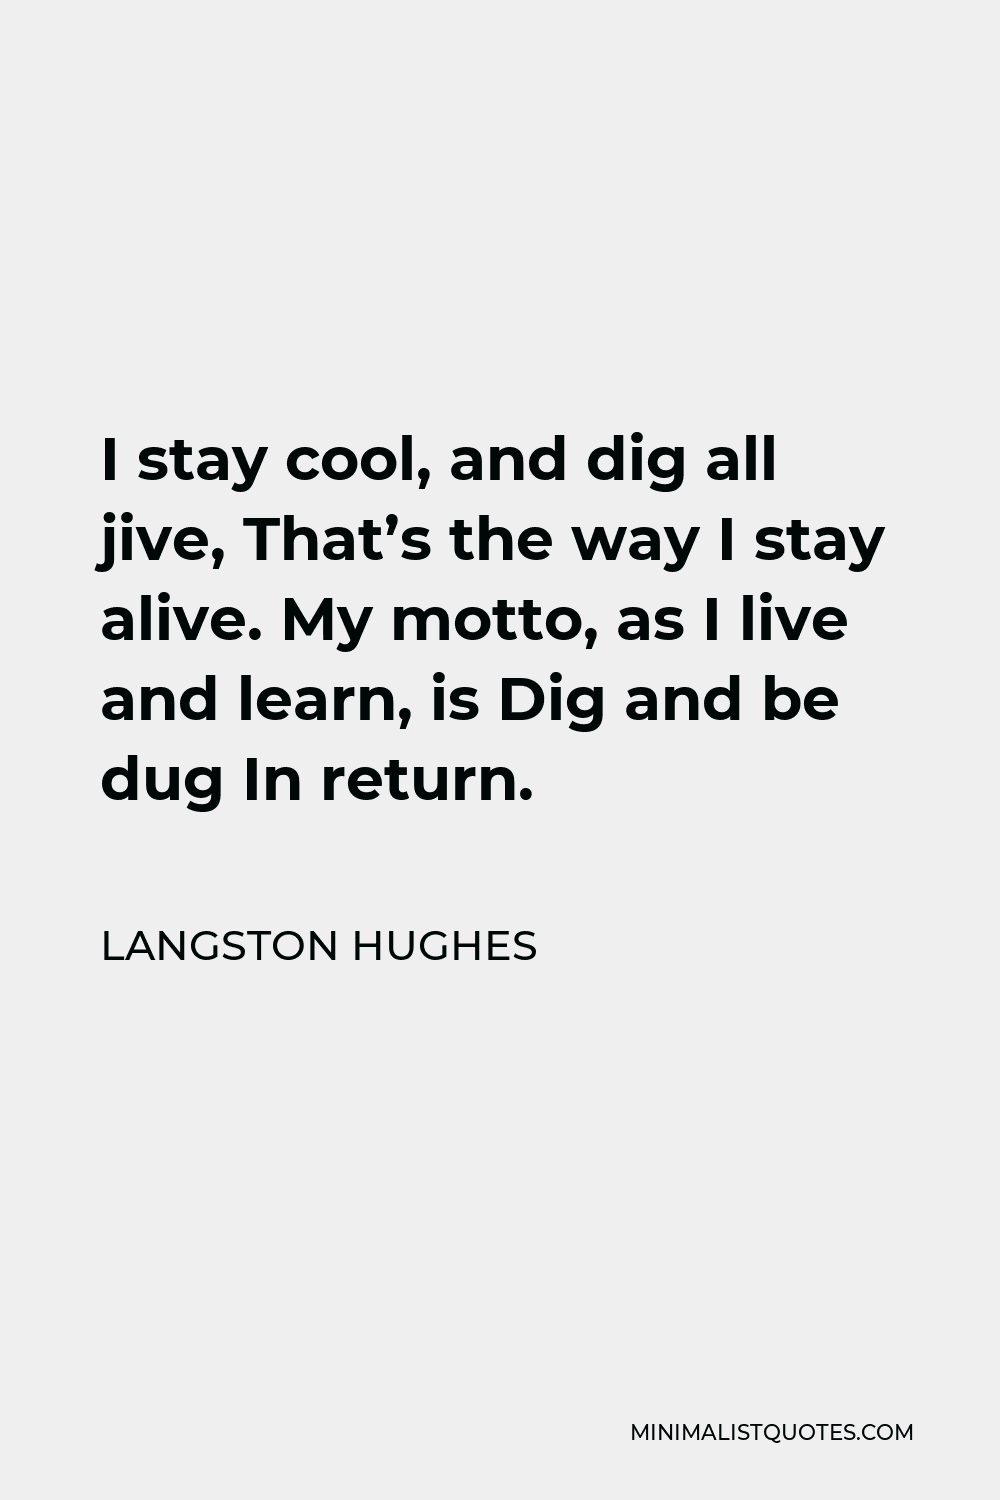 Langston Hughes Quote - I stay cool, and dig all jive, That’s the way I stay alive. My motto, as I live and learn, is Dig and be dug In return.